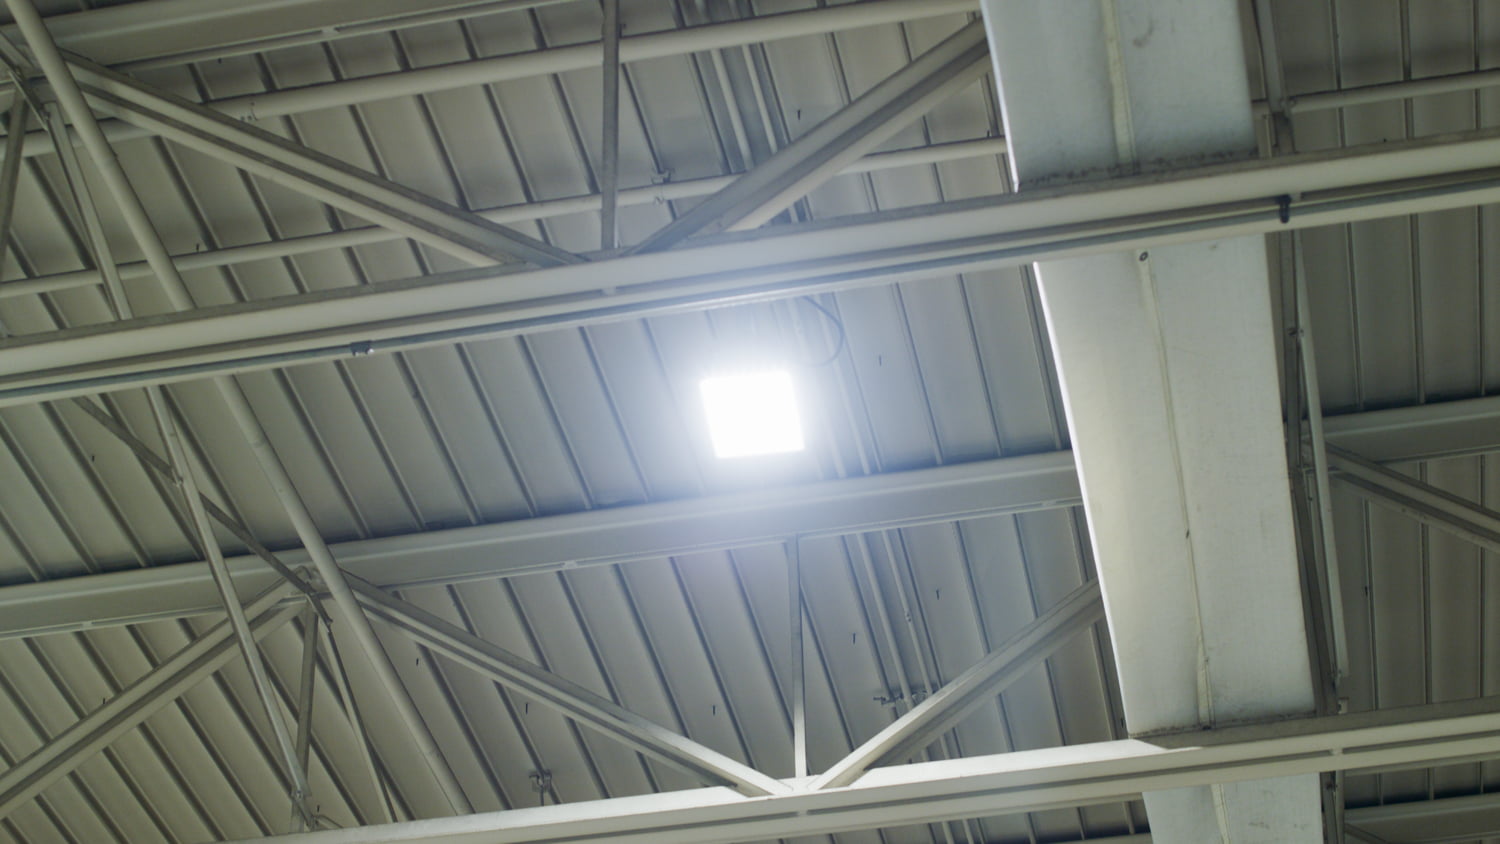 A square shaped explosion proof LED light mounted on the ceiling inside an industrial facility